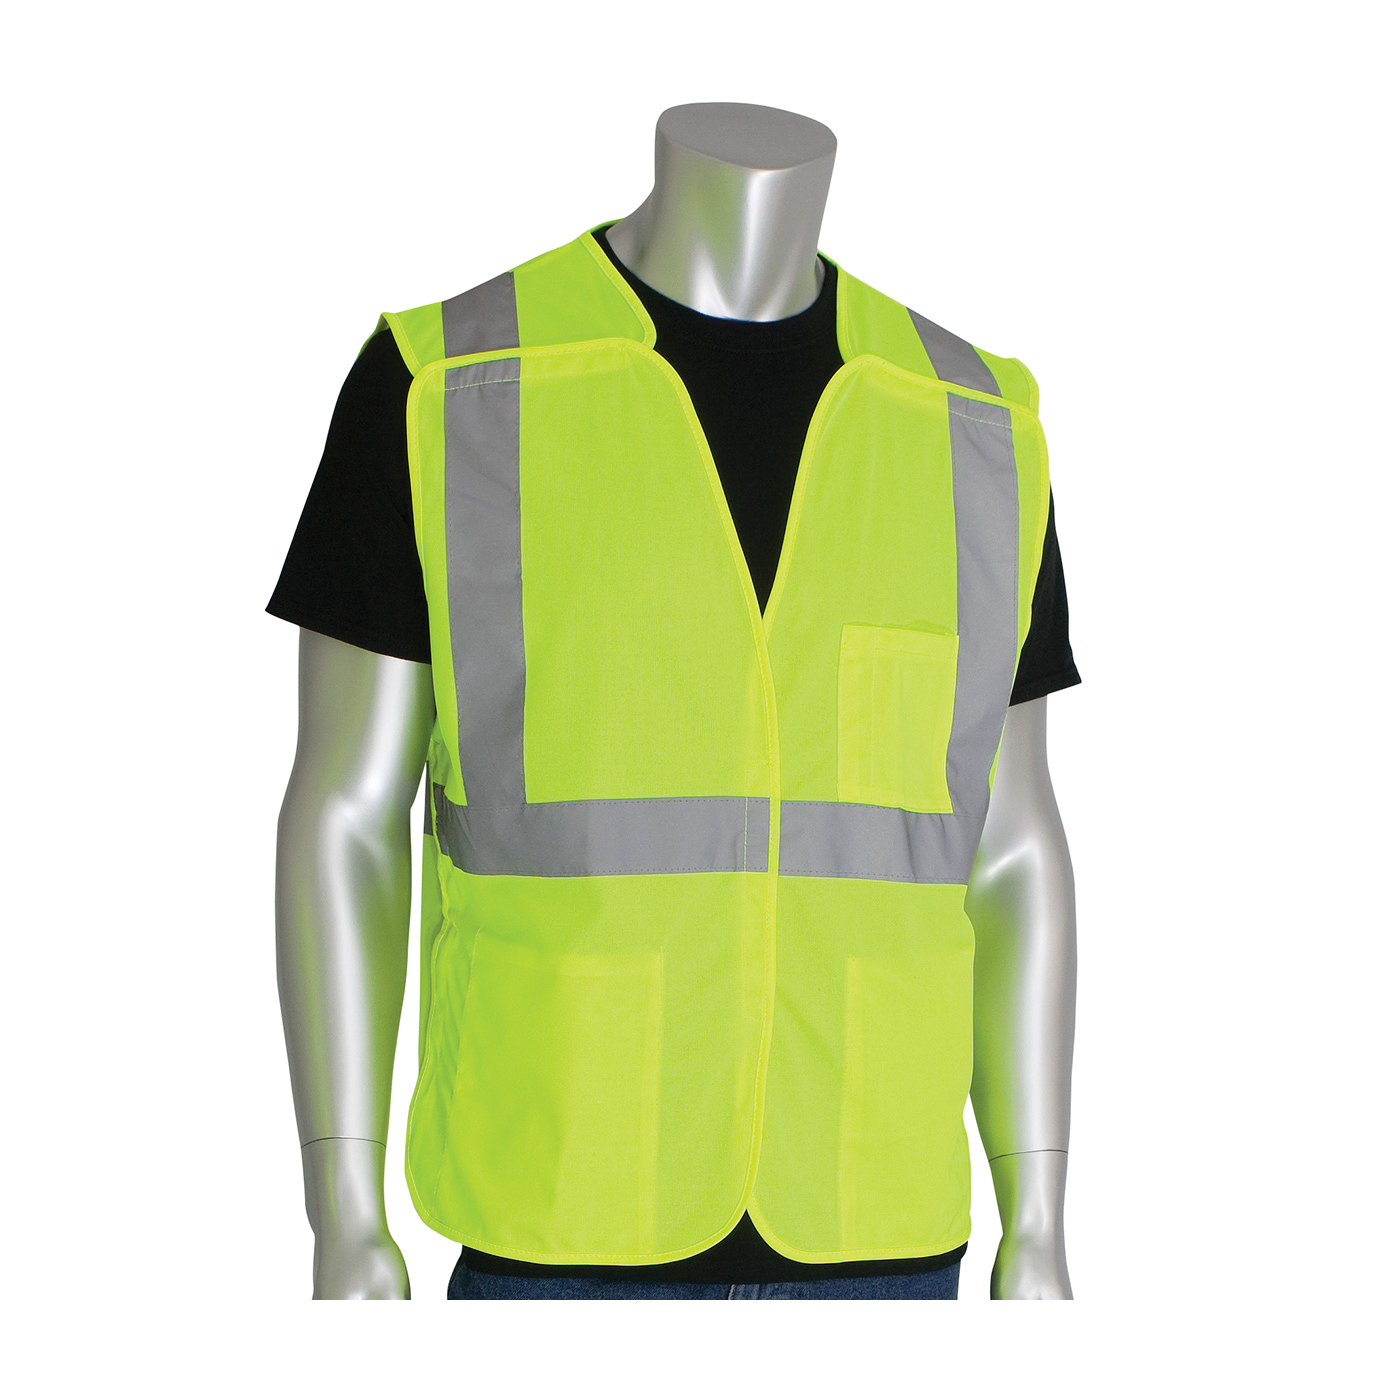 PIP® 302-5PVLY-4X Safety Vest, 4XL, Hi-Viz Lime Yellow, Polyester, Hook and Loop Closure, 3 Pockets, ANSI Class: Class 2, Specifications Met: ANSI 107 Type R